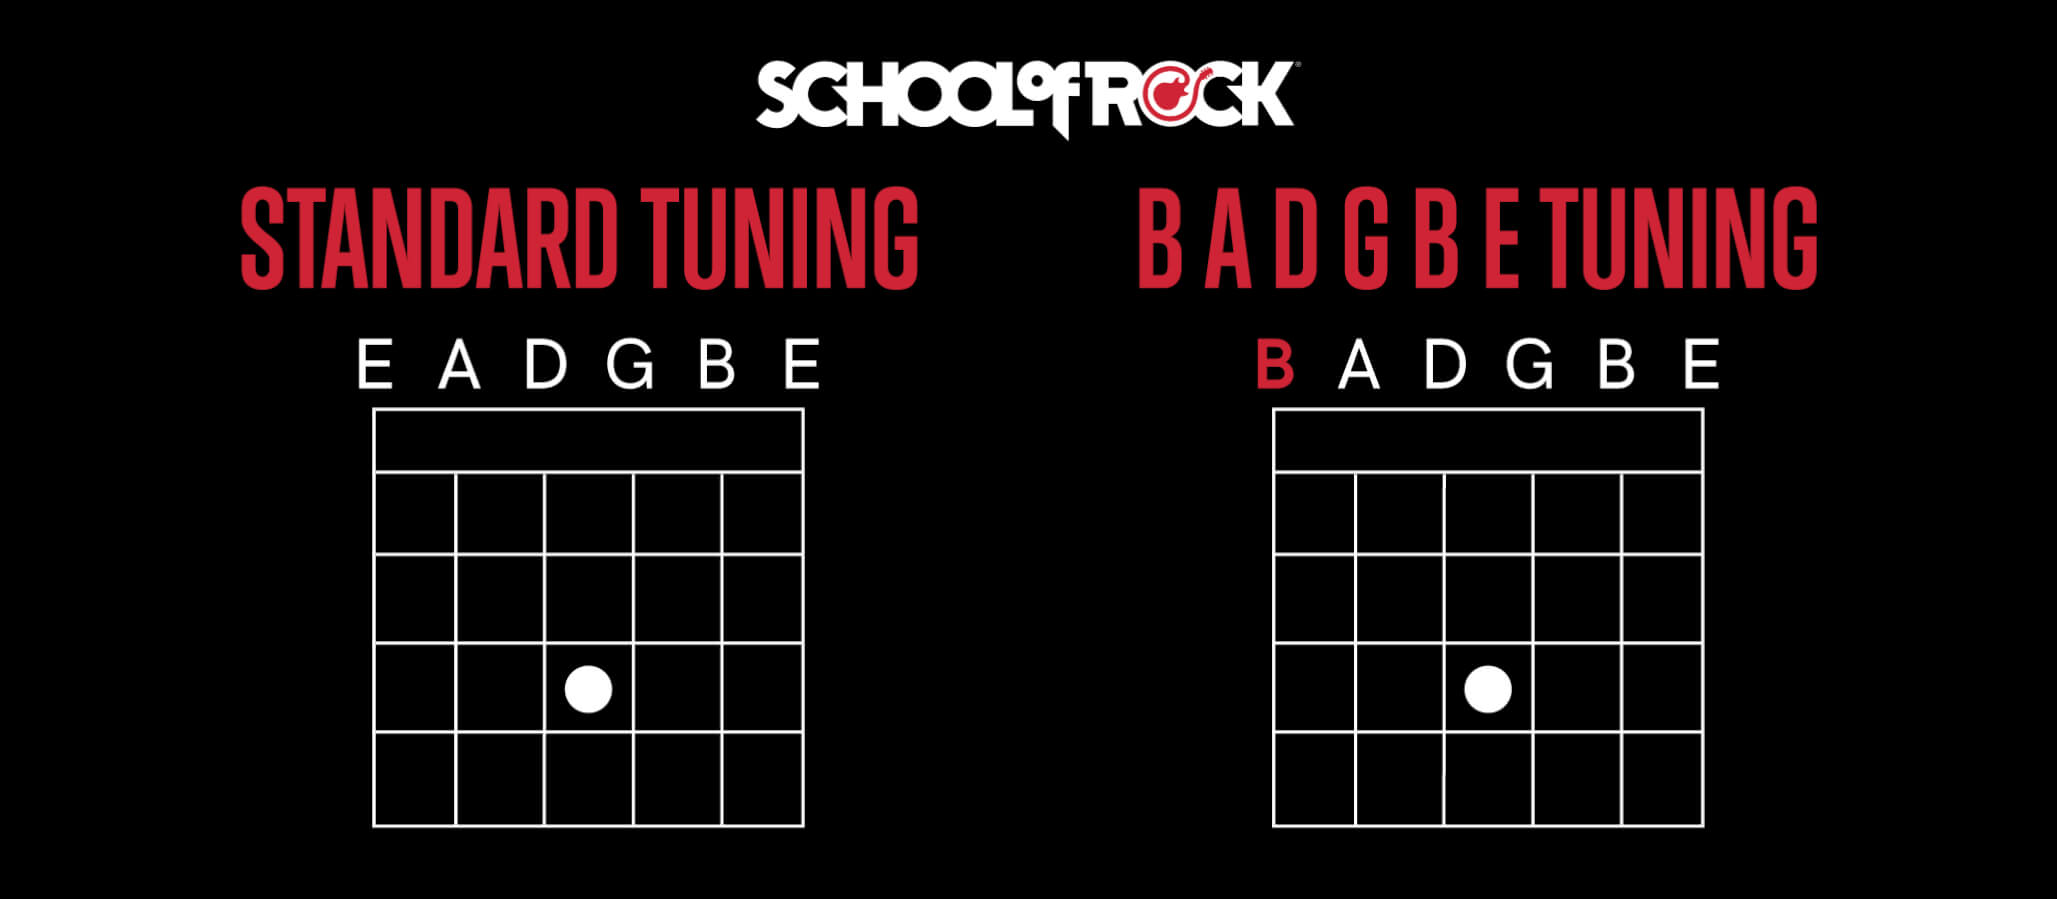 Tuning (low to high): B A D G B E